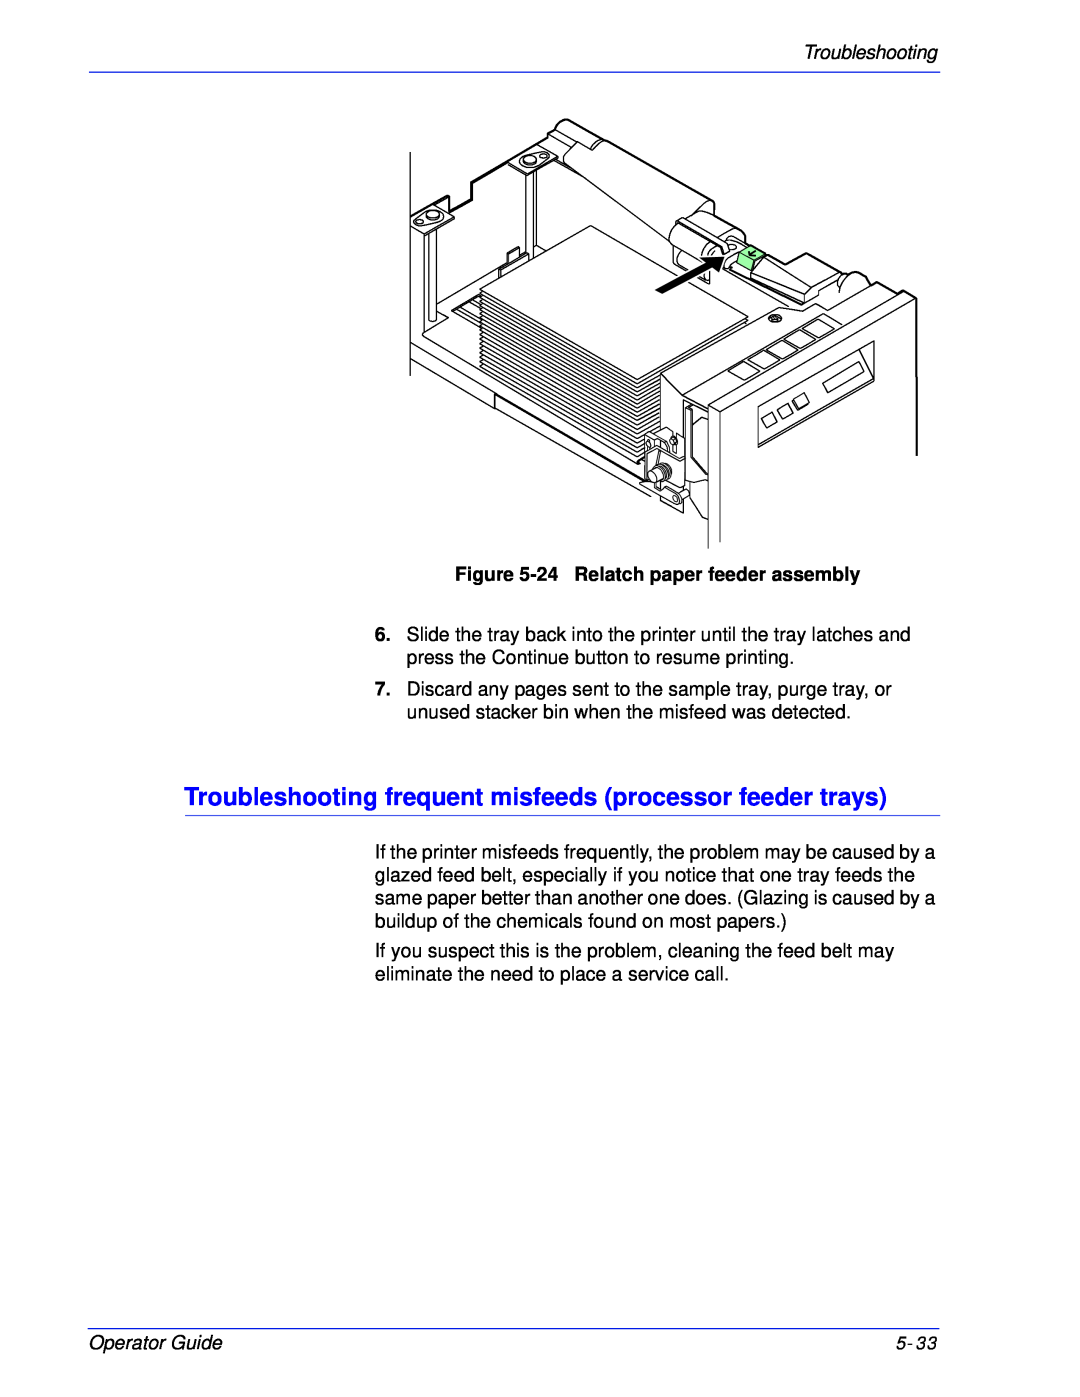 Xerox 180 EPS, 100 manual Troubleshooting, 24Relatch paper feeder assembly, Operator Guide 